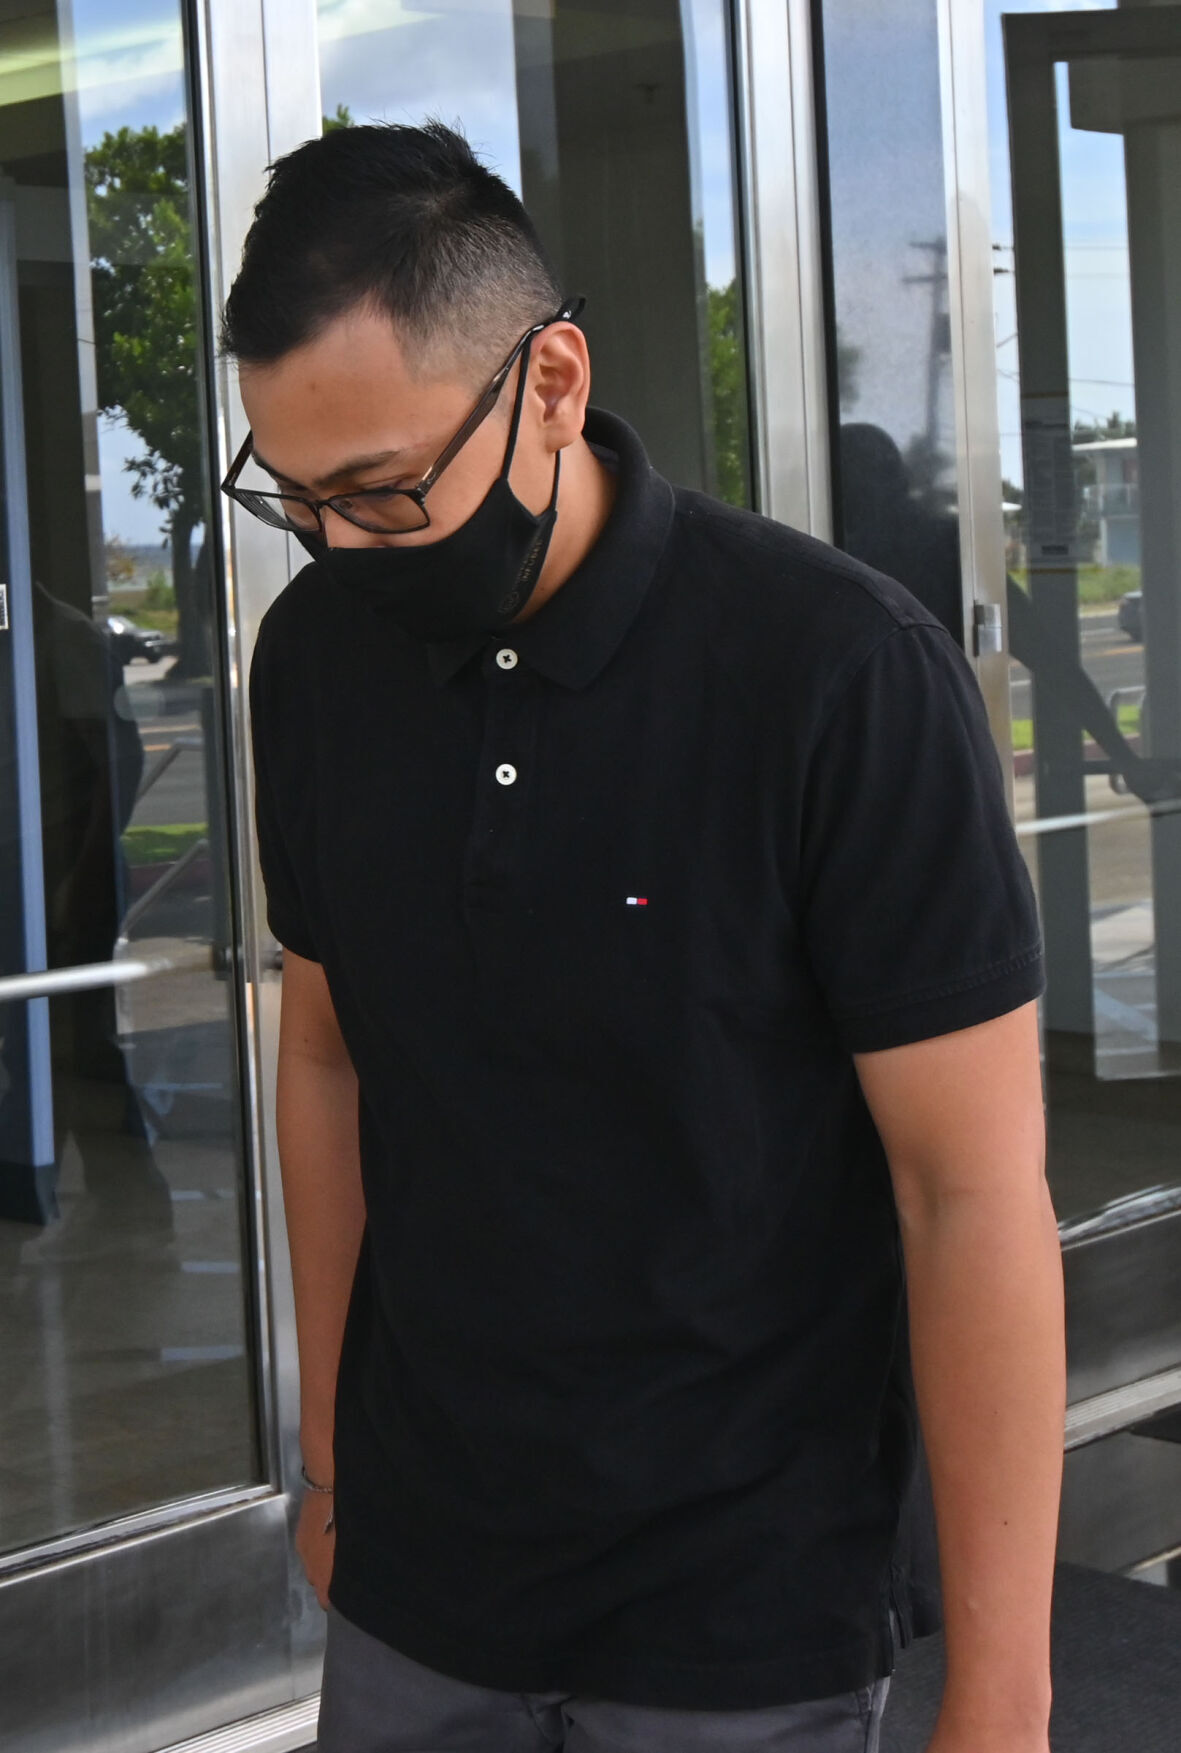 Man guilty of possessing child porn spared jail time after victims request Guam News postguam